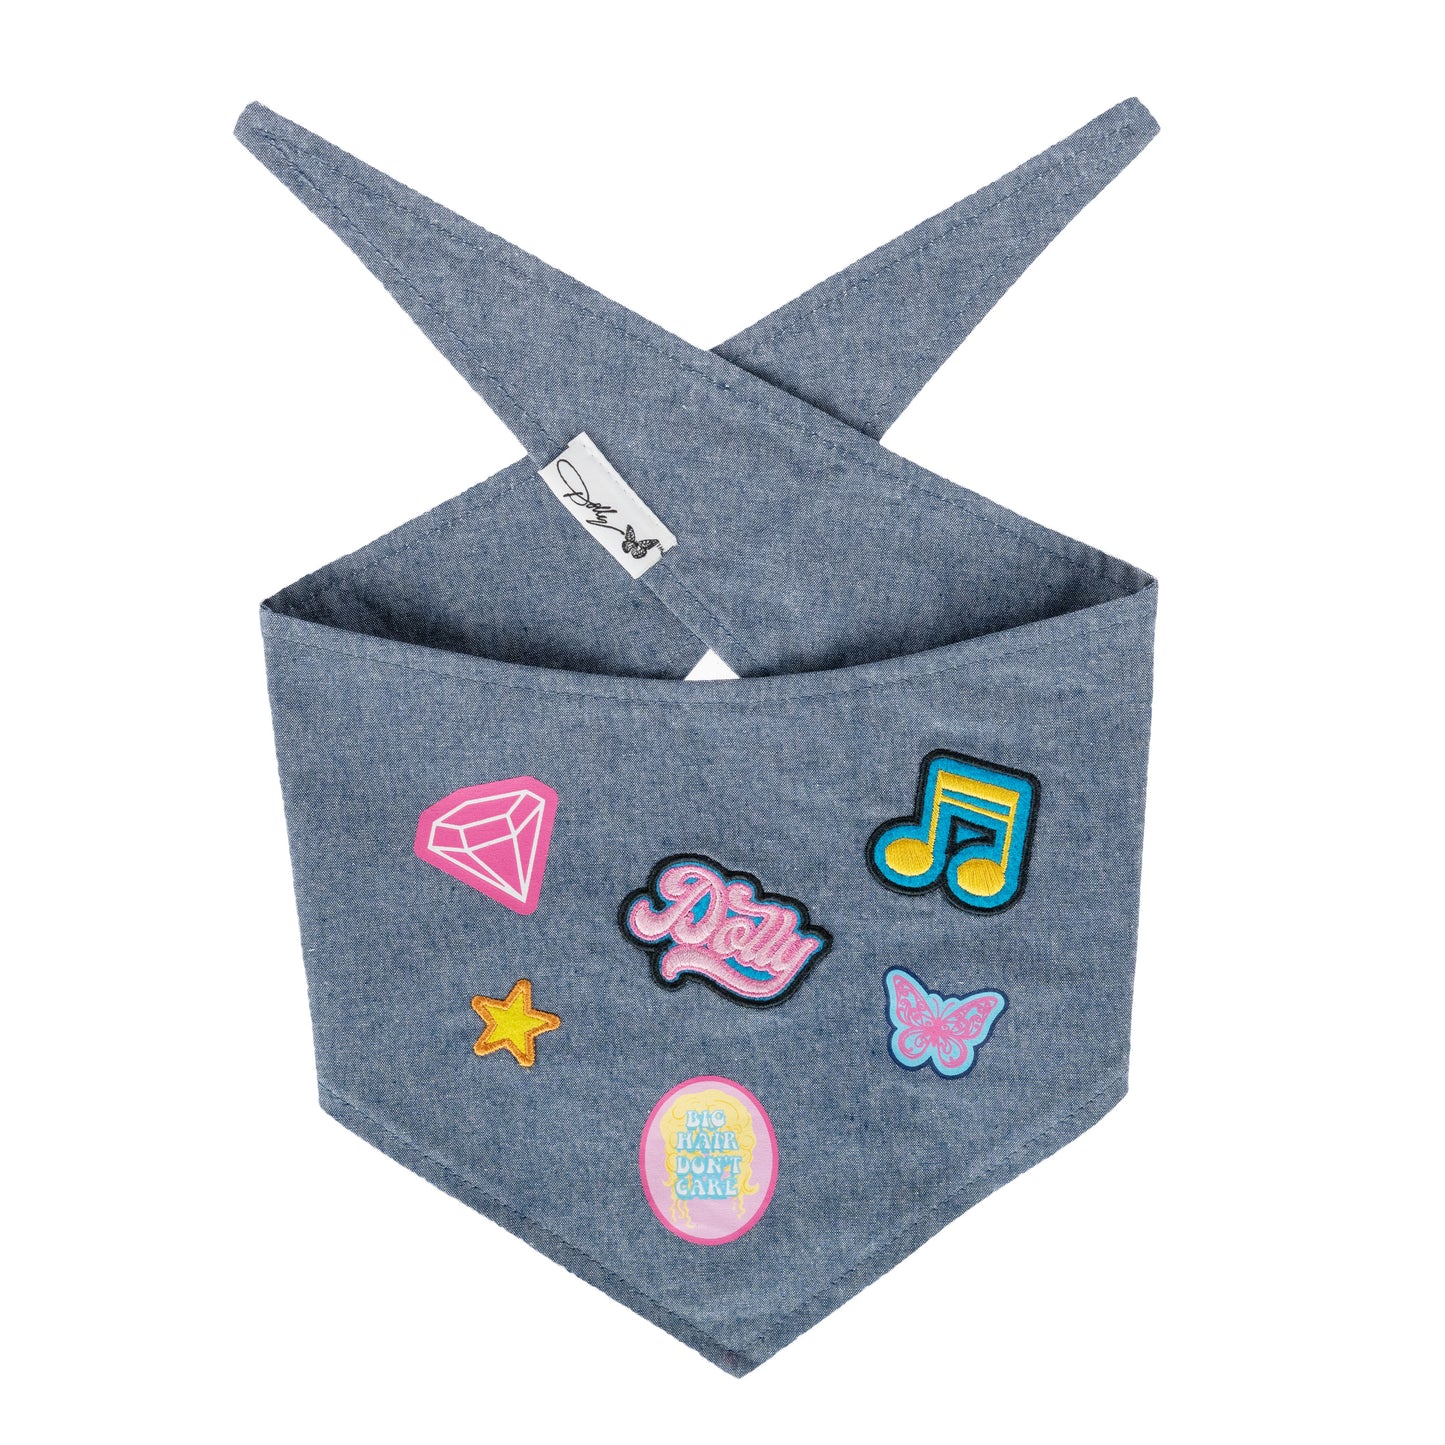 Blue Chambray Bandana with Patches for Pets